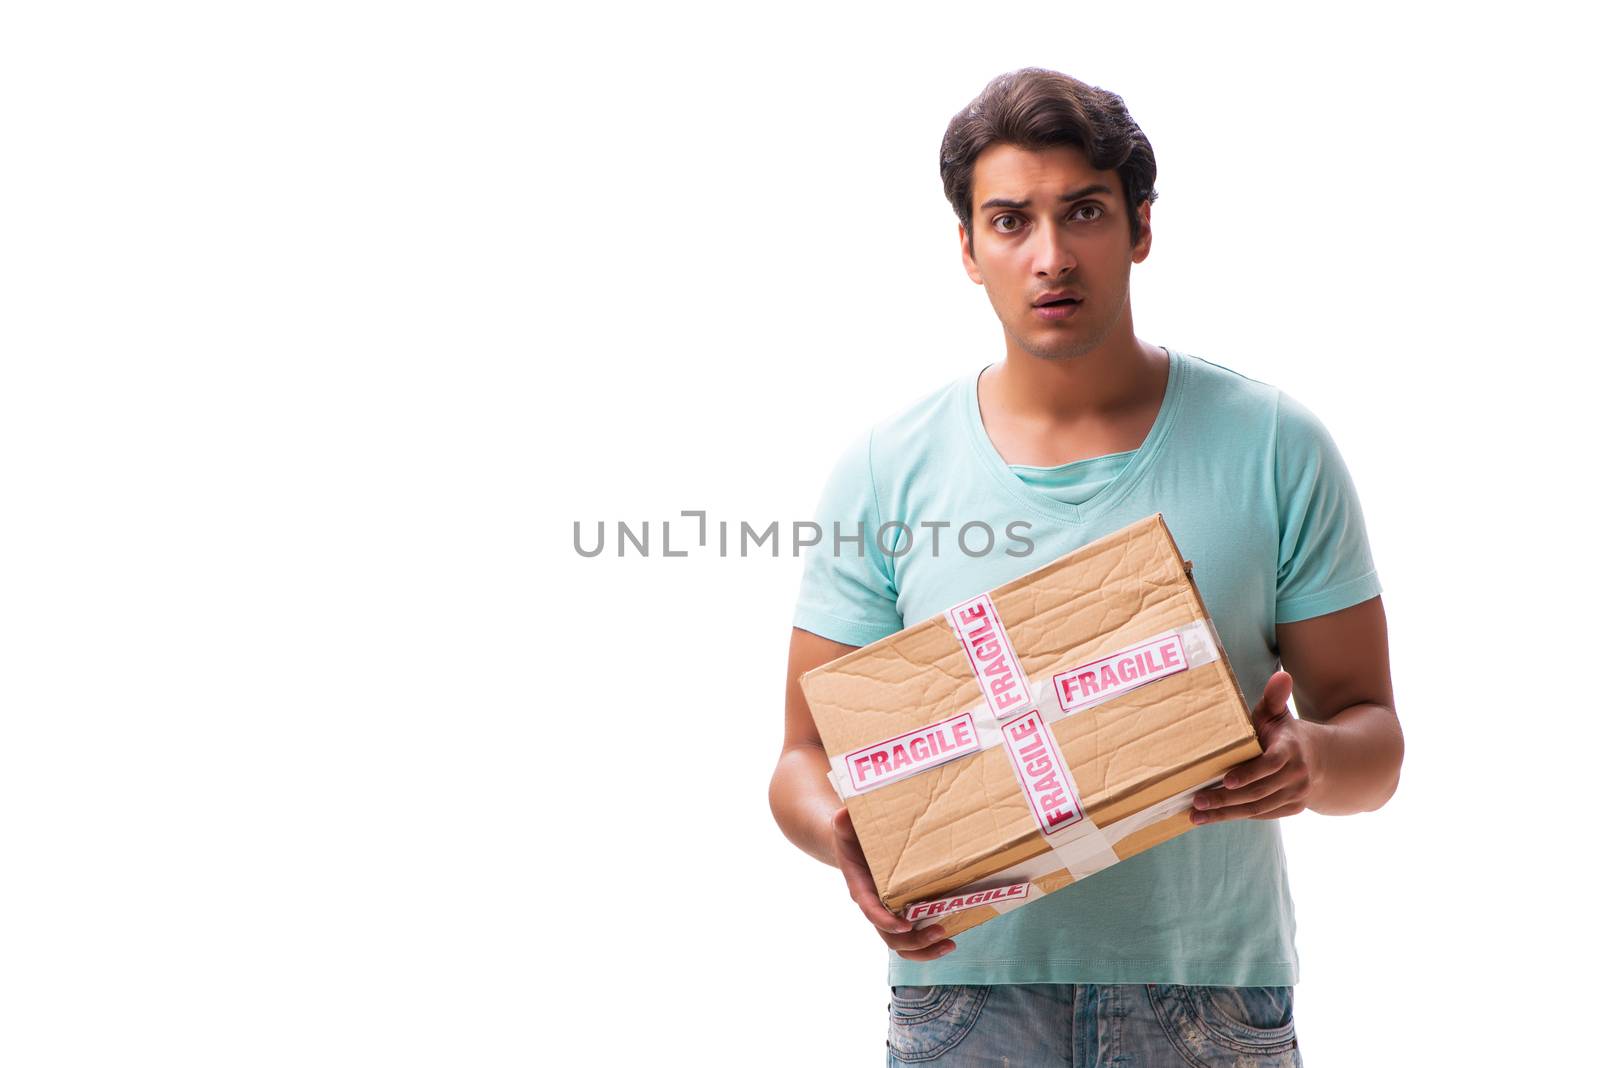 Young handsome man with fragile box ordered from Internet 